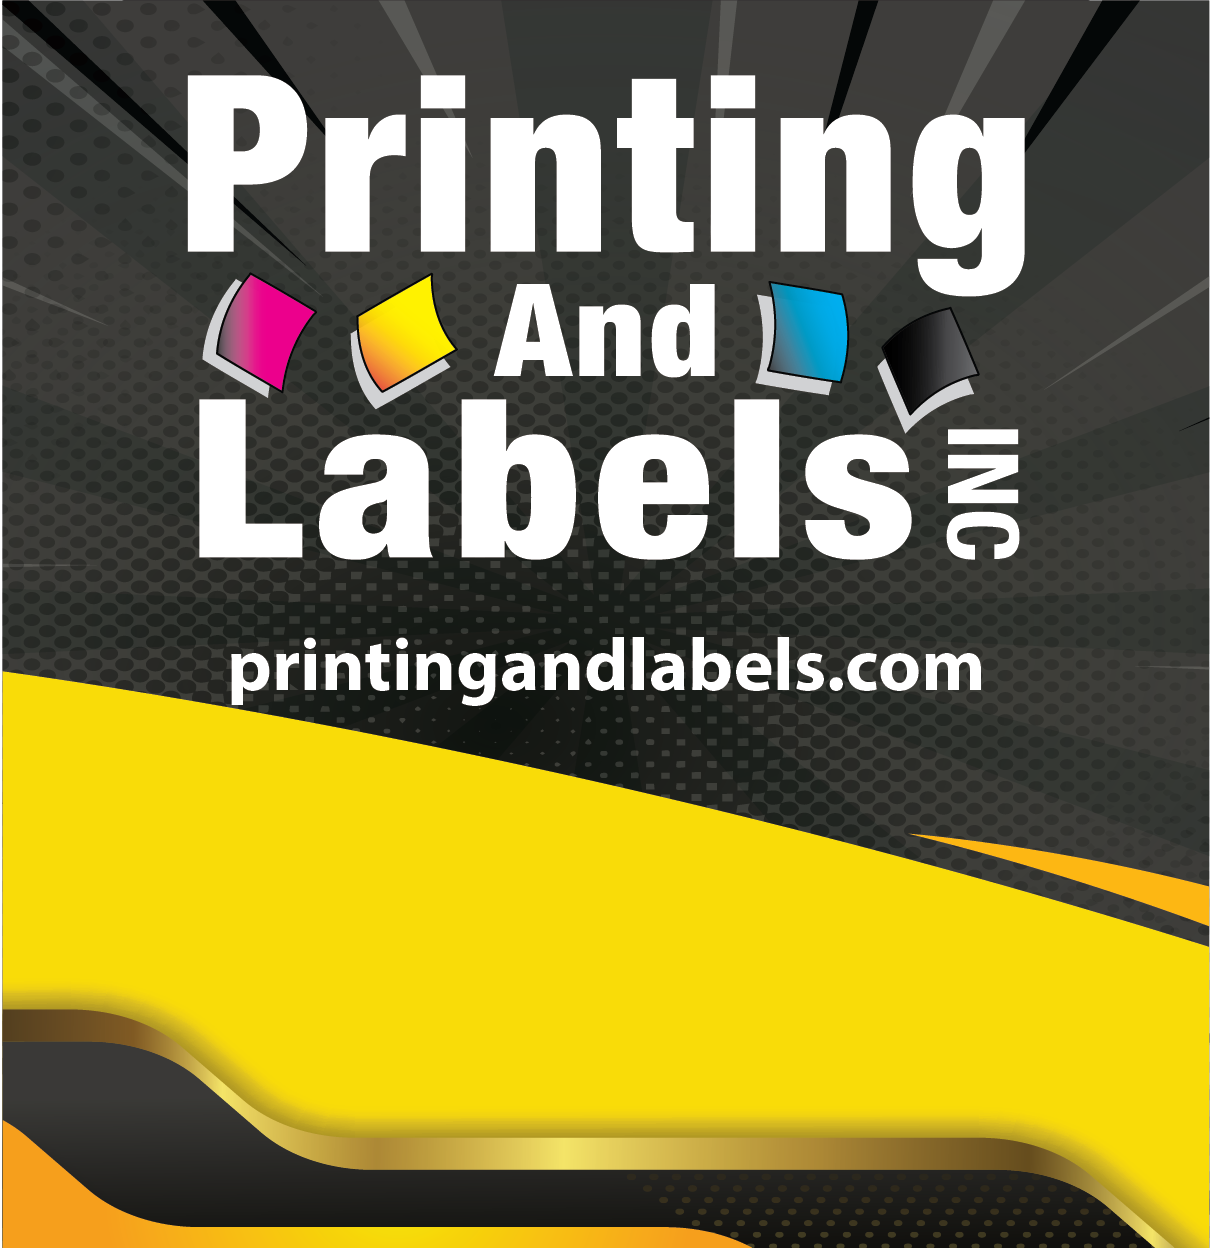 Printing and Labels, Inc